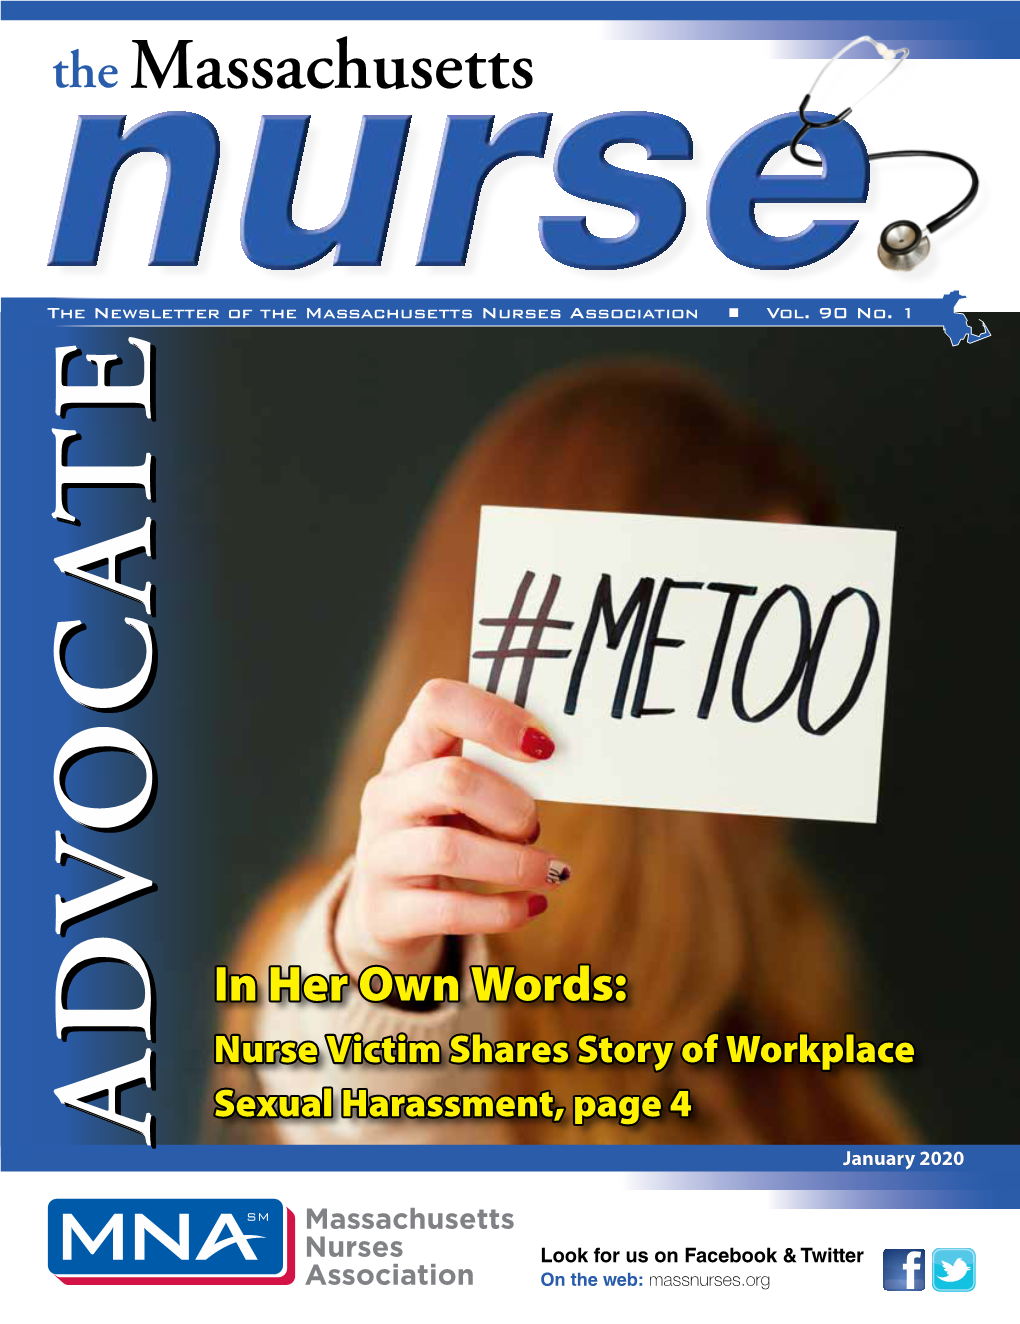 In Her Own Words: Nurse Victim Shares Story of Workplace Sexual Harassment, Page 4